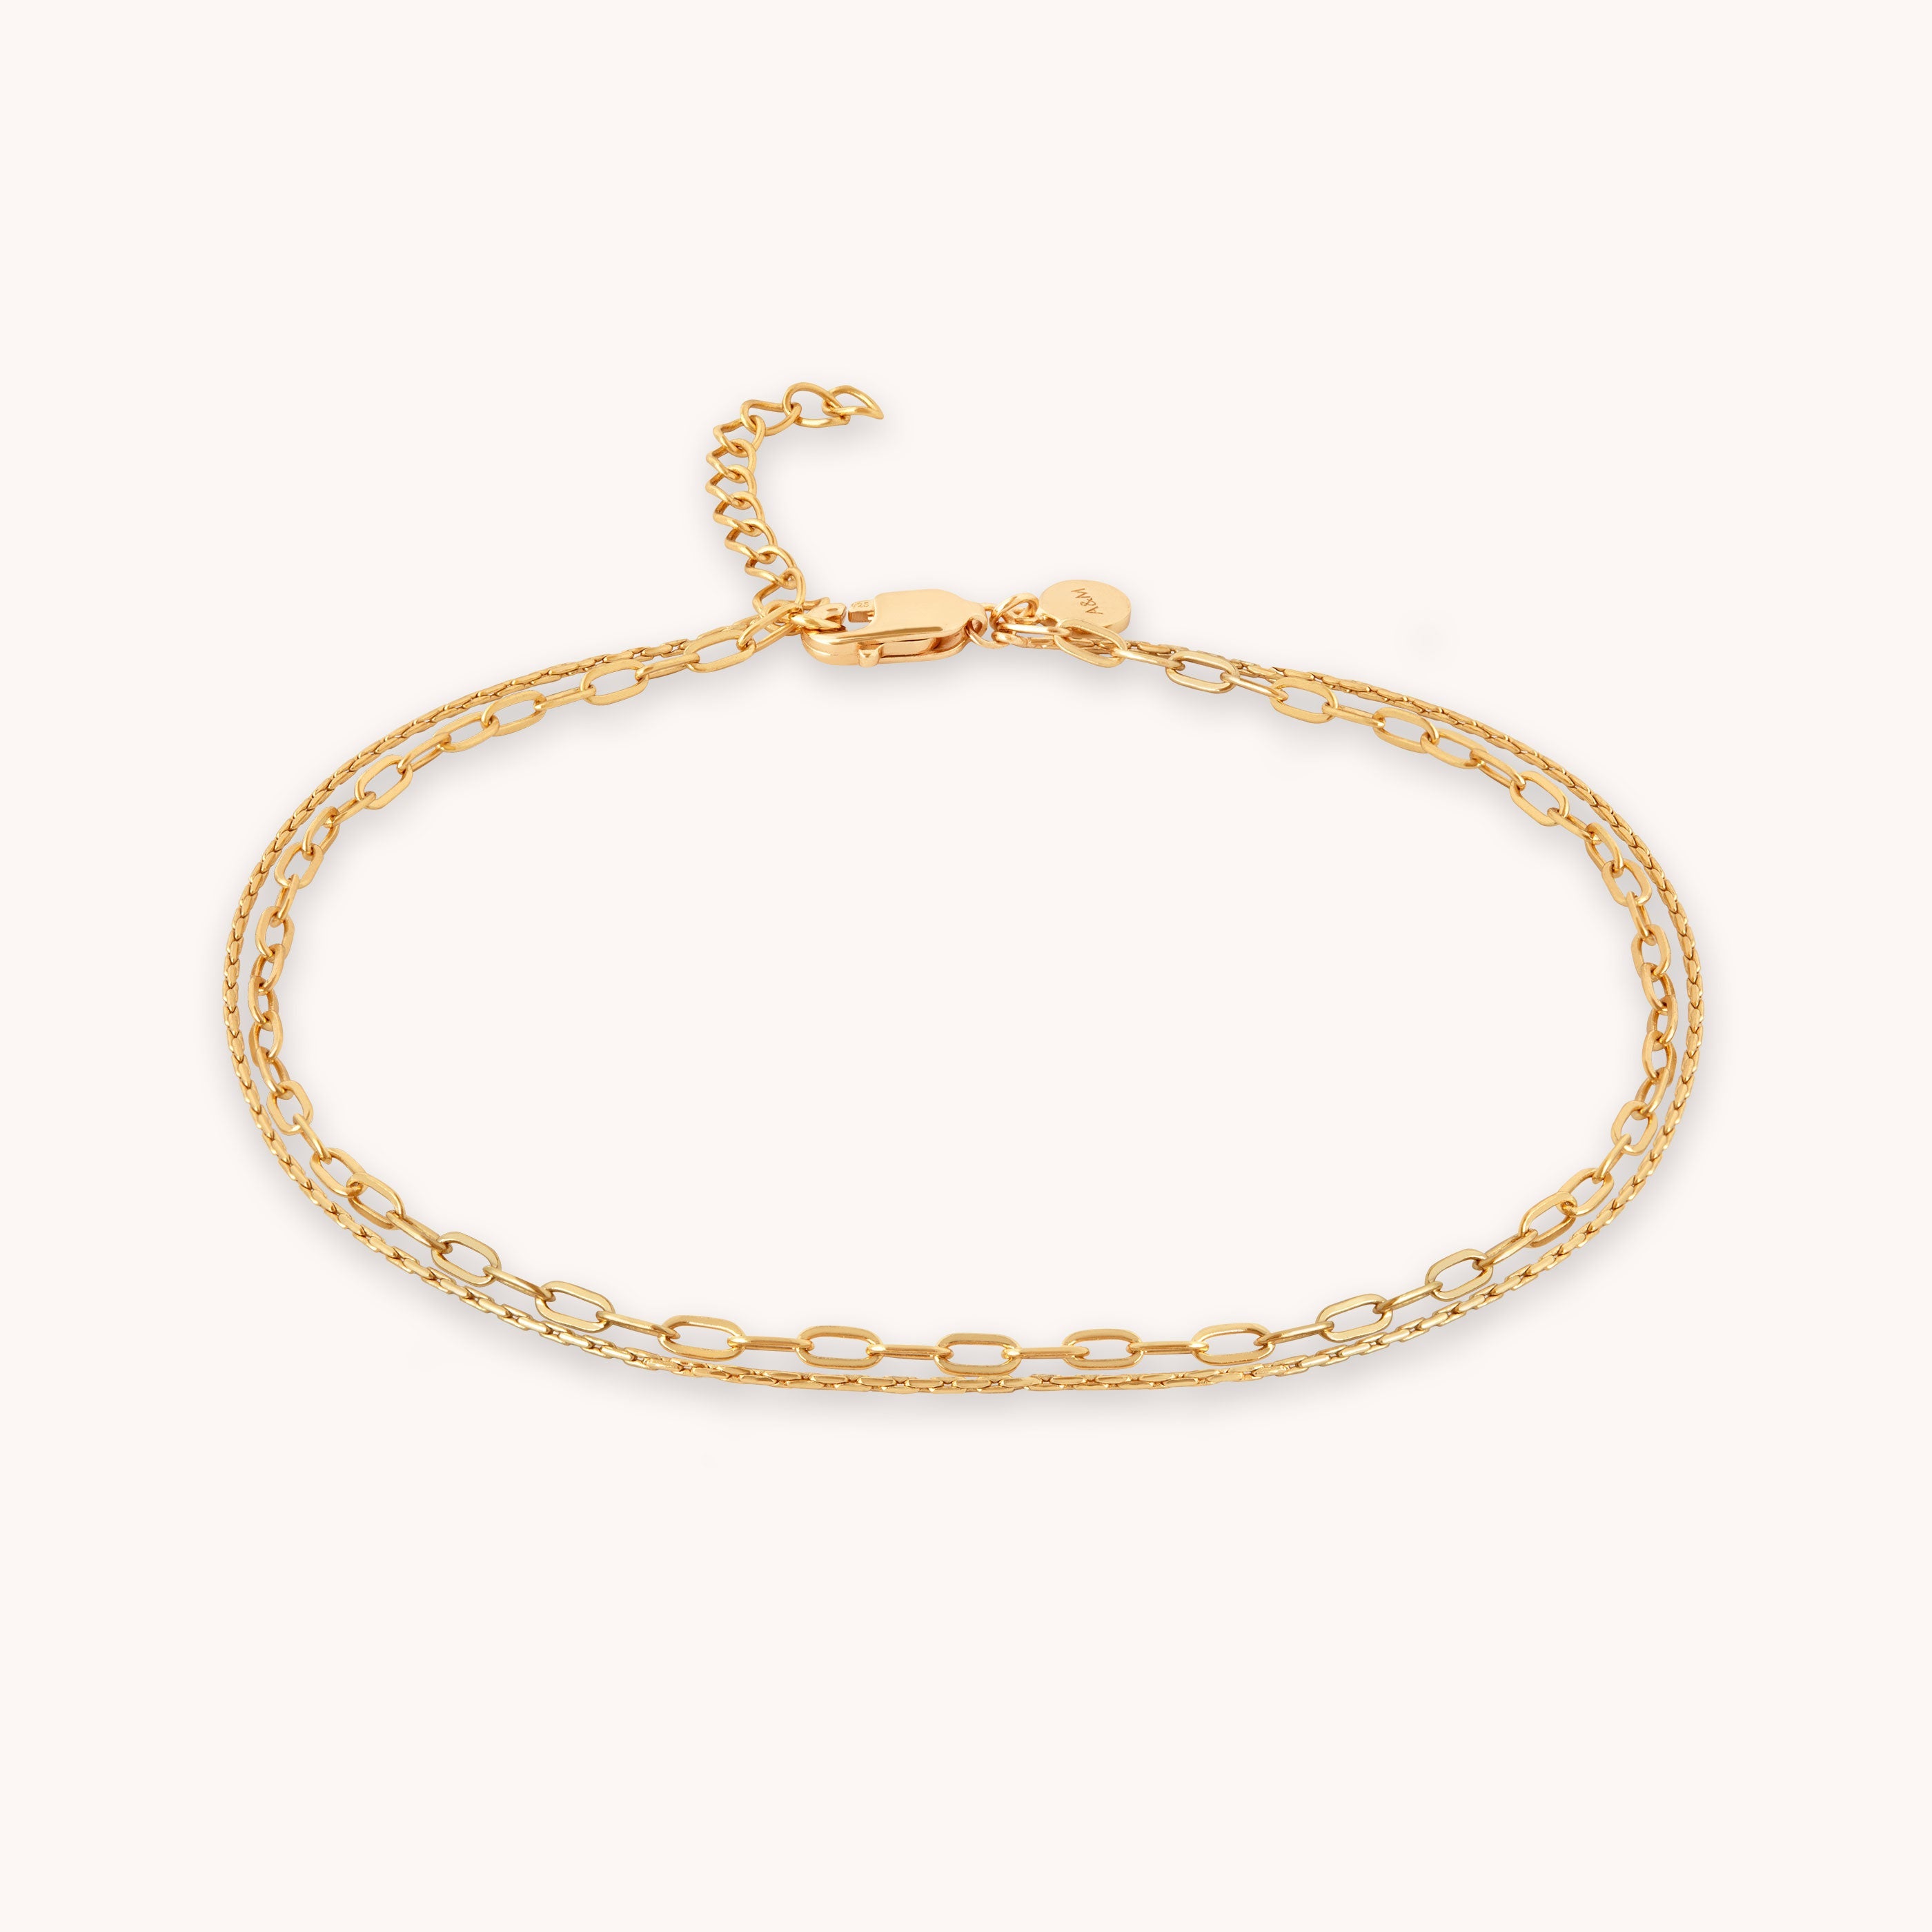 AM22-ENER-ANK-DUO-G  1489 × 1489px  Duo Chain Anklet in Gold